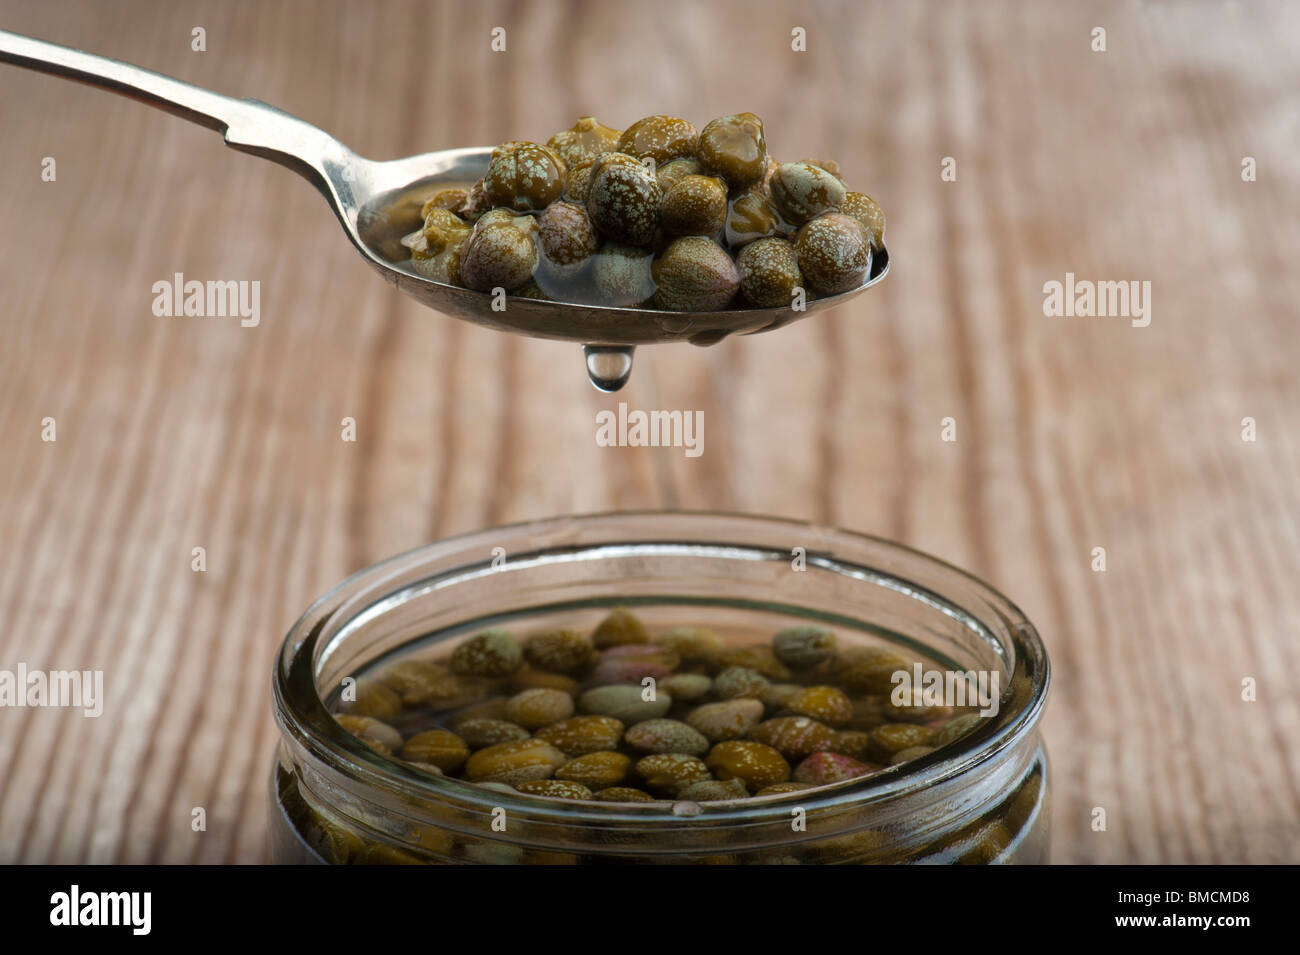 A Spoonful Of Dripping Capers, Held Over Above A Jar Of Capers In Brine, On A Wooden Kitchen Table Stock Photo